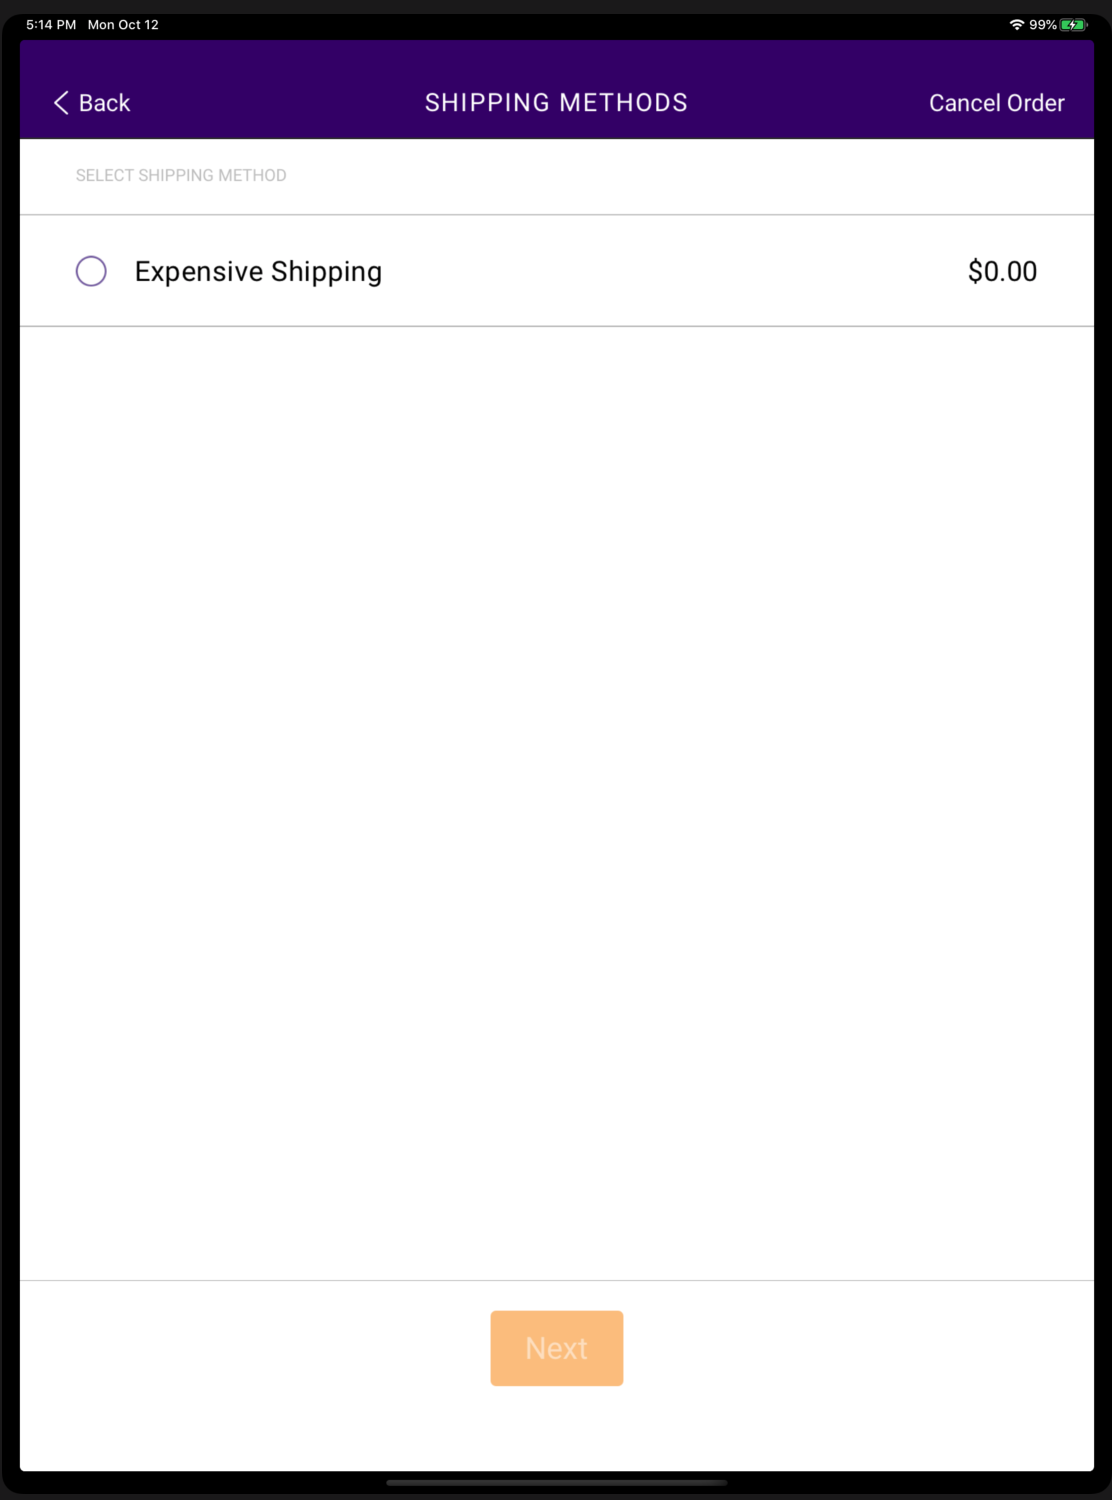 The checkout page prompting the user to select a shipping method